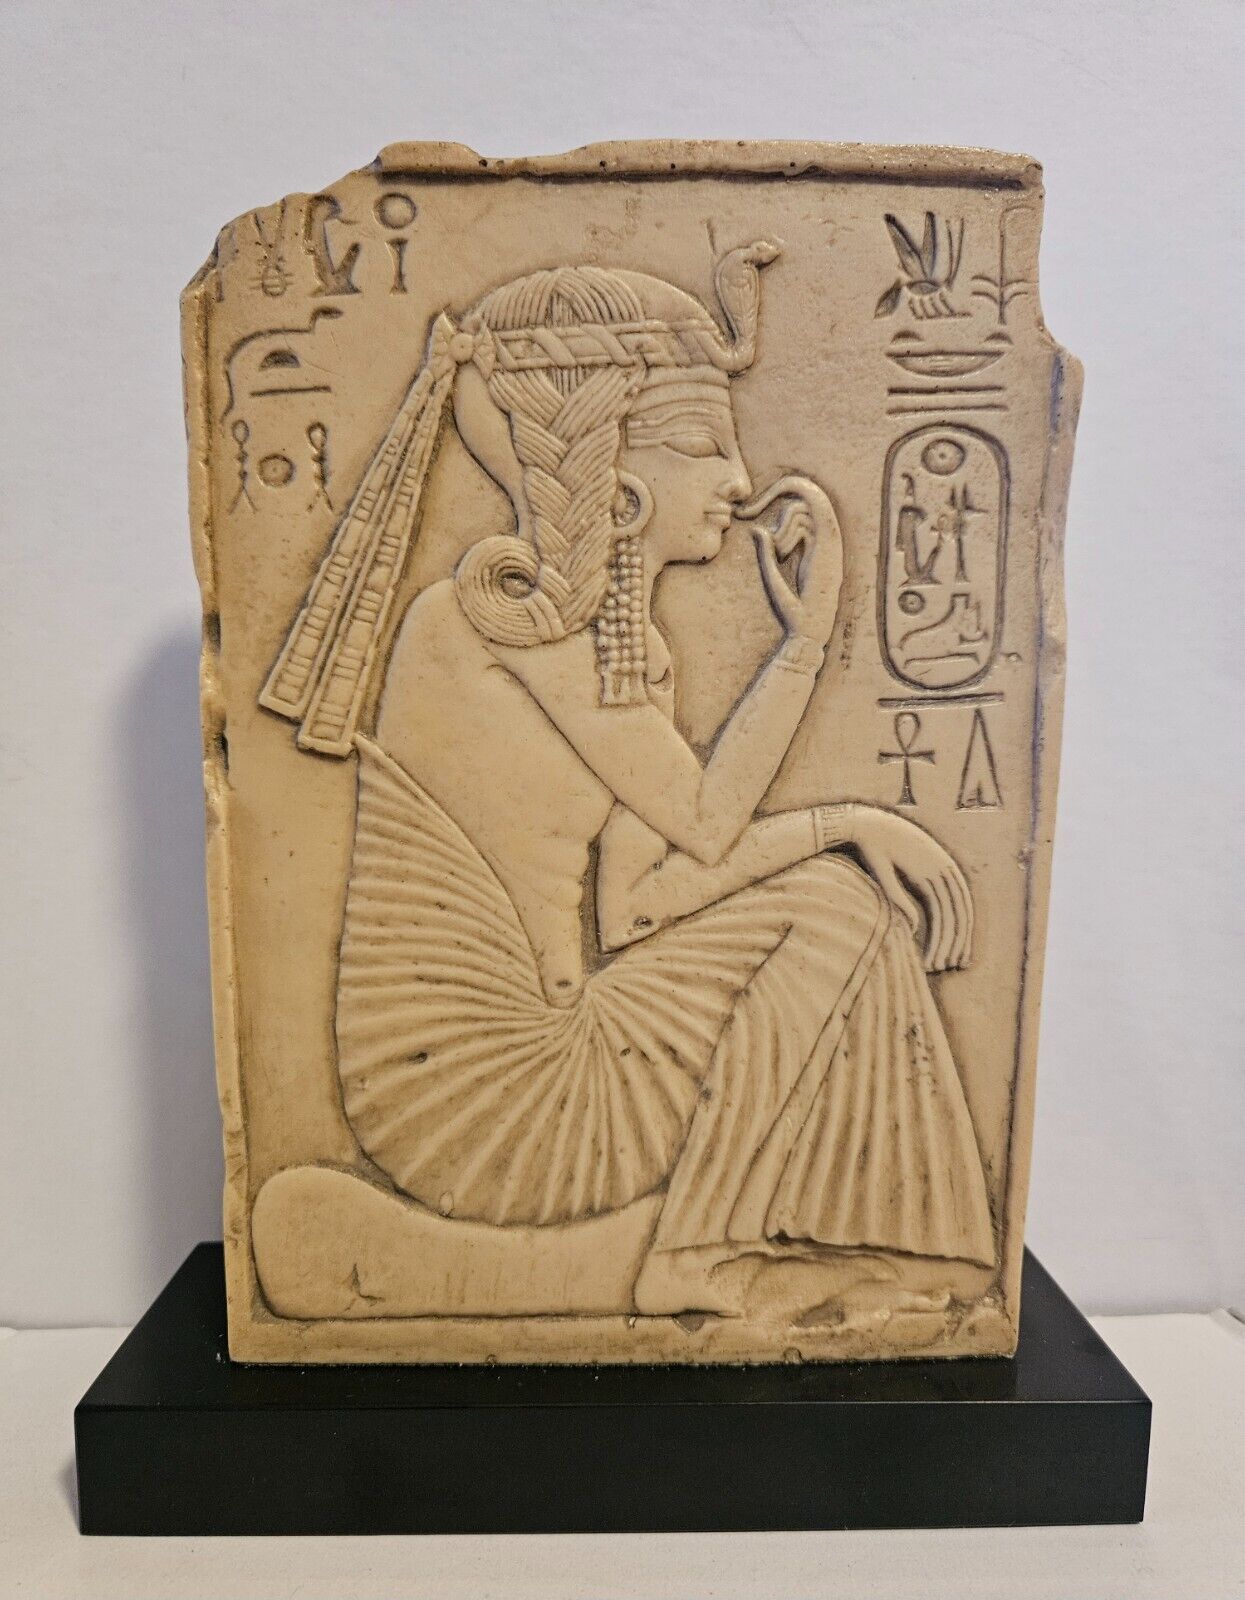 RARE VINTAGE EGYPTIAN ANCIENT PANEL STELE OF RAMSES LOUVRE REPRODUCTION